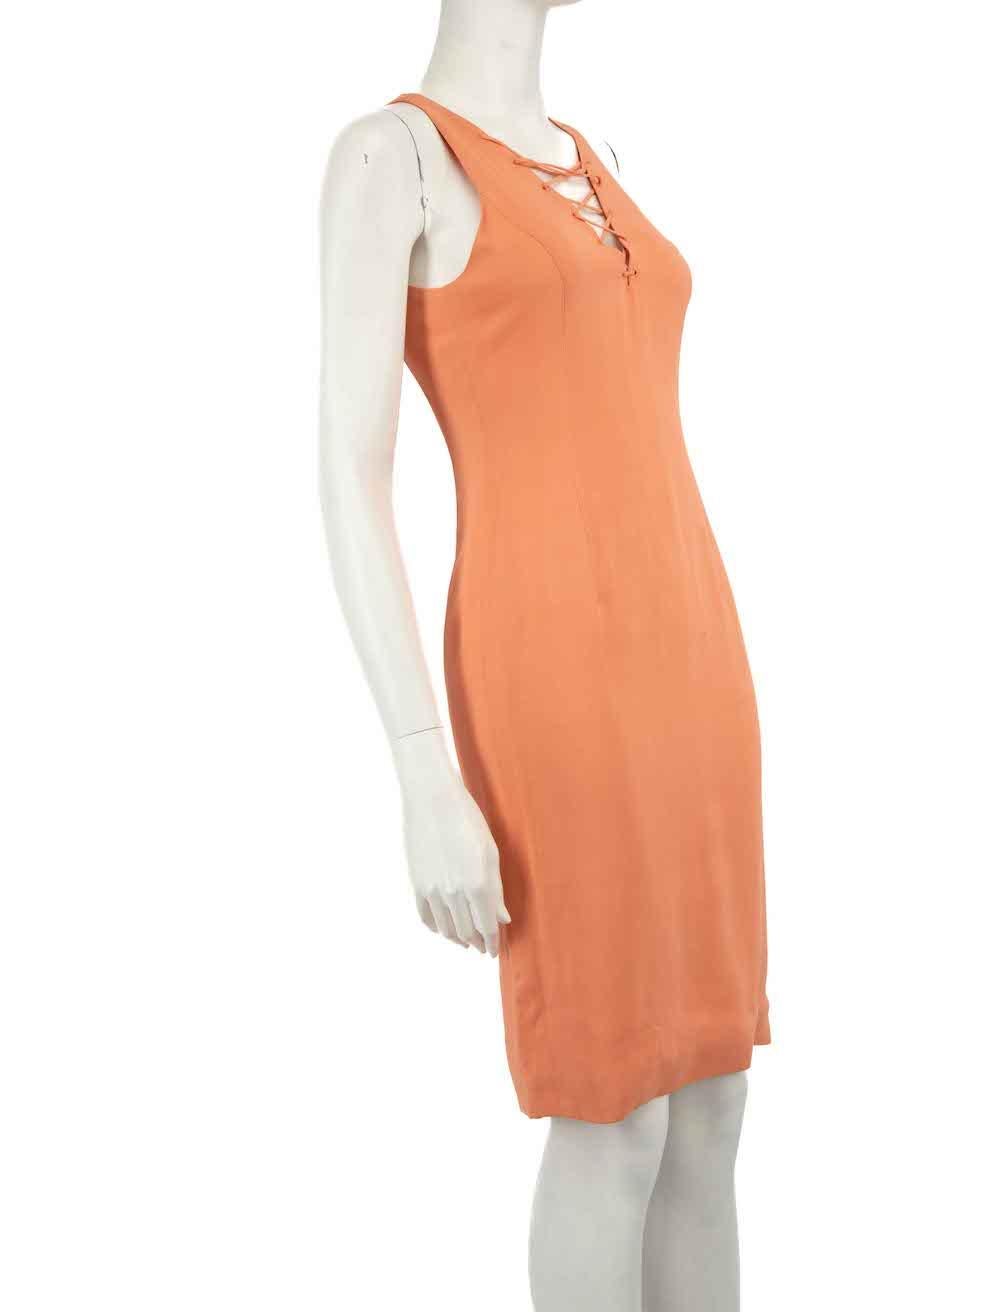 CONDITION is Good. General wear to dress is evident. Moderate signs of wear to the front and back with discoloured marks and pilling to the texture on this used Versace designer resale item.
 
 Details
 Coral
 Viscose
 Dress
 Sleeveless
 Mini
 Laced